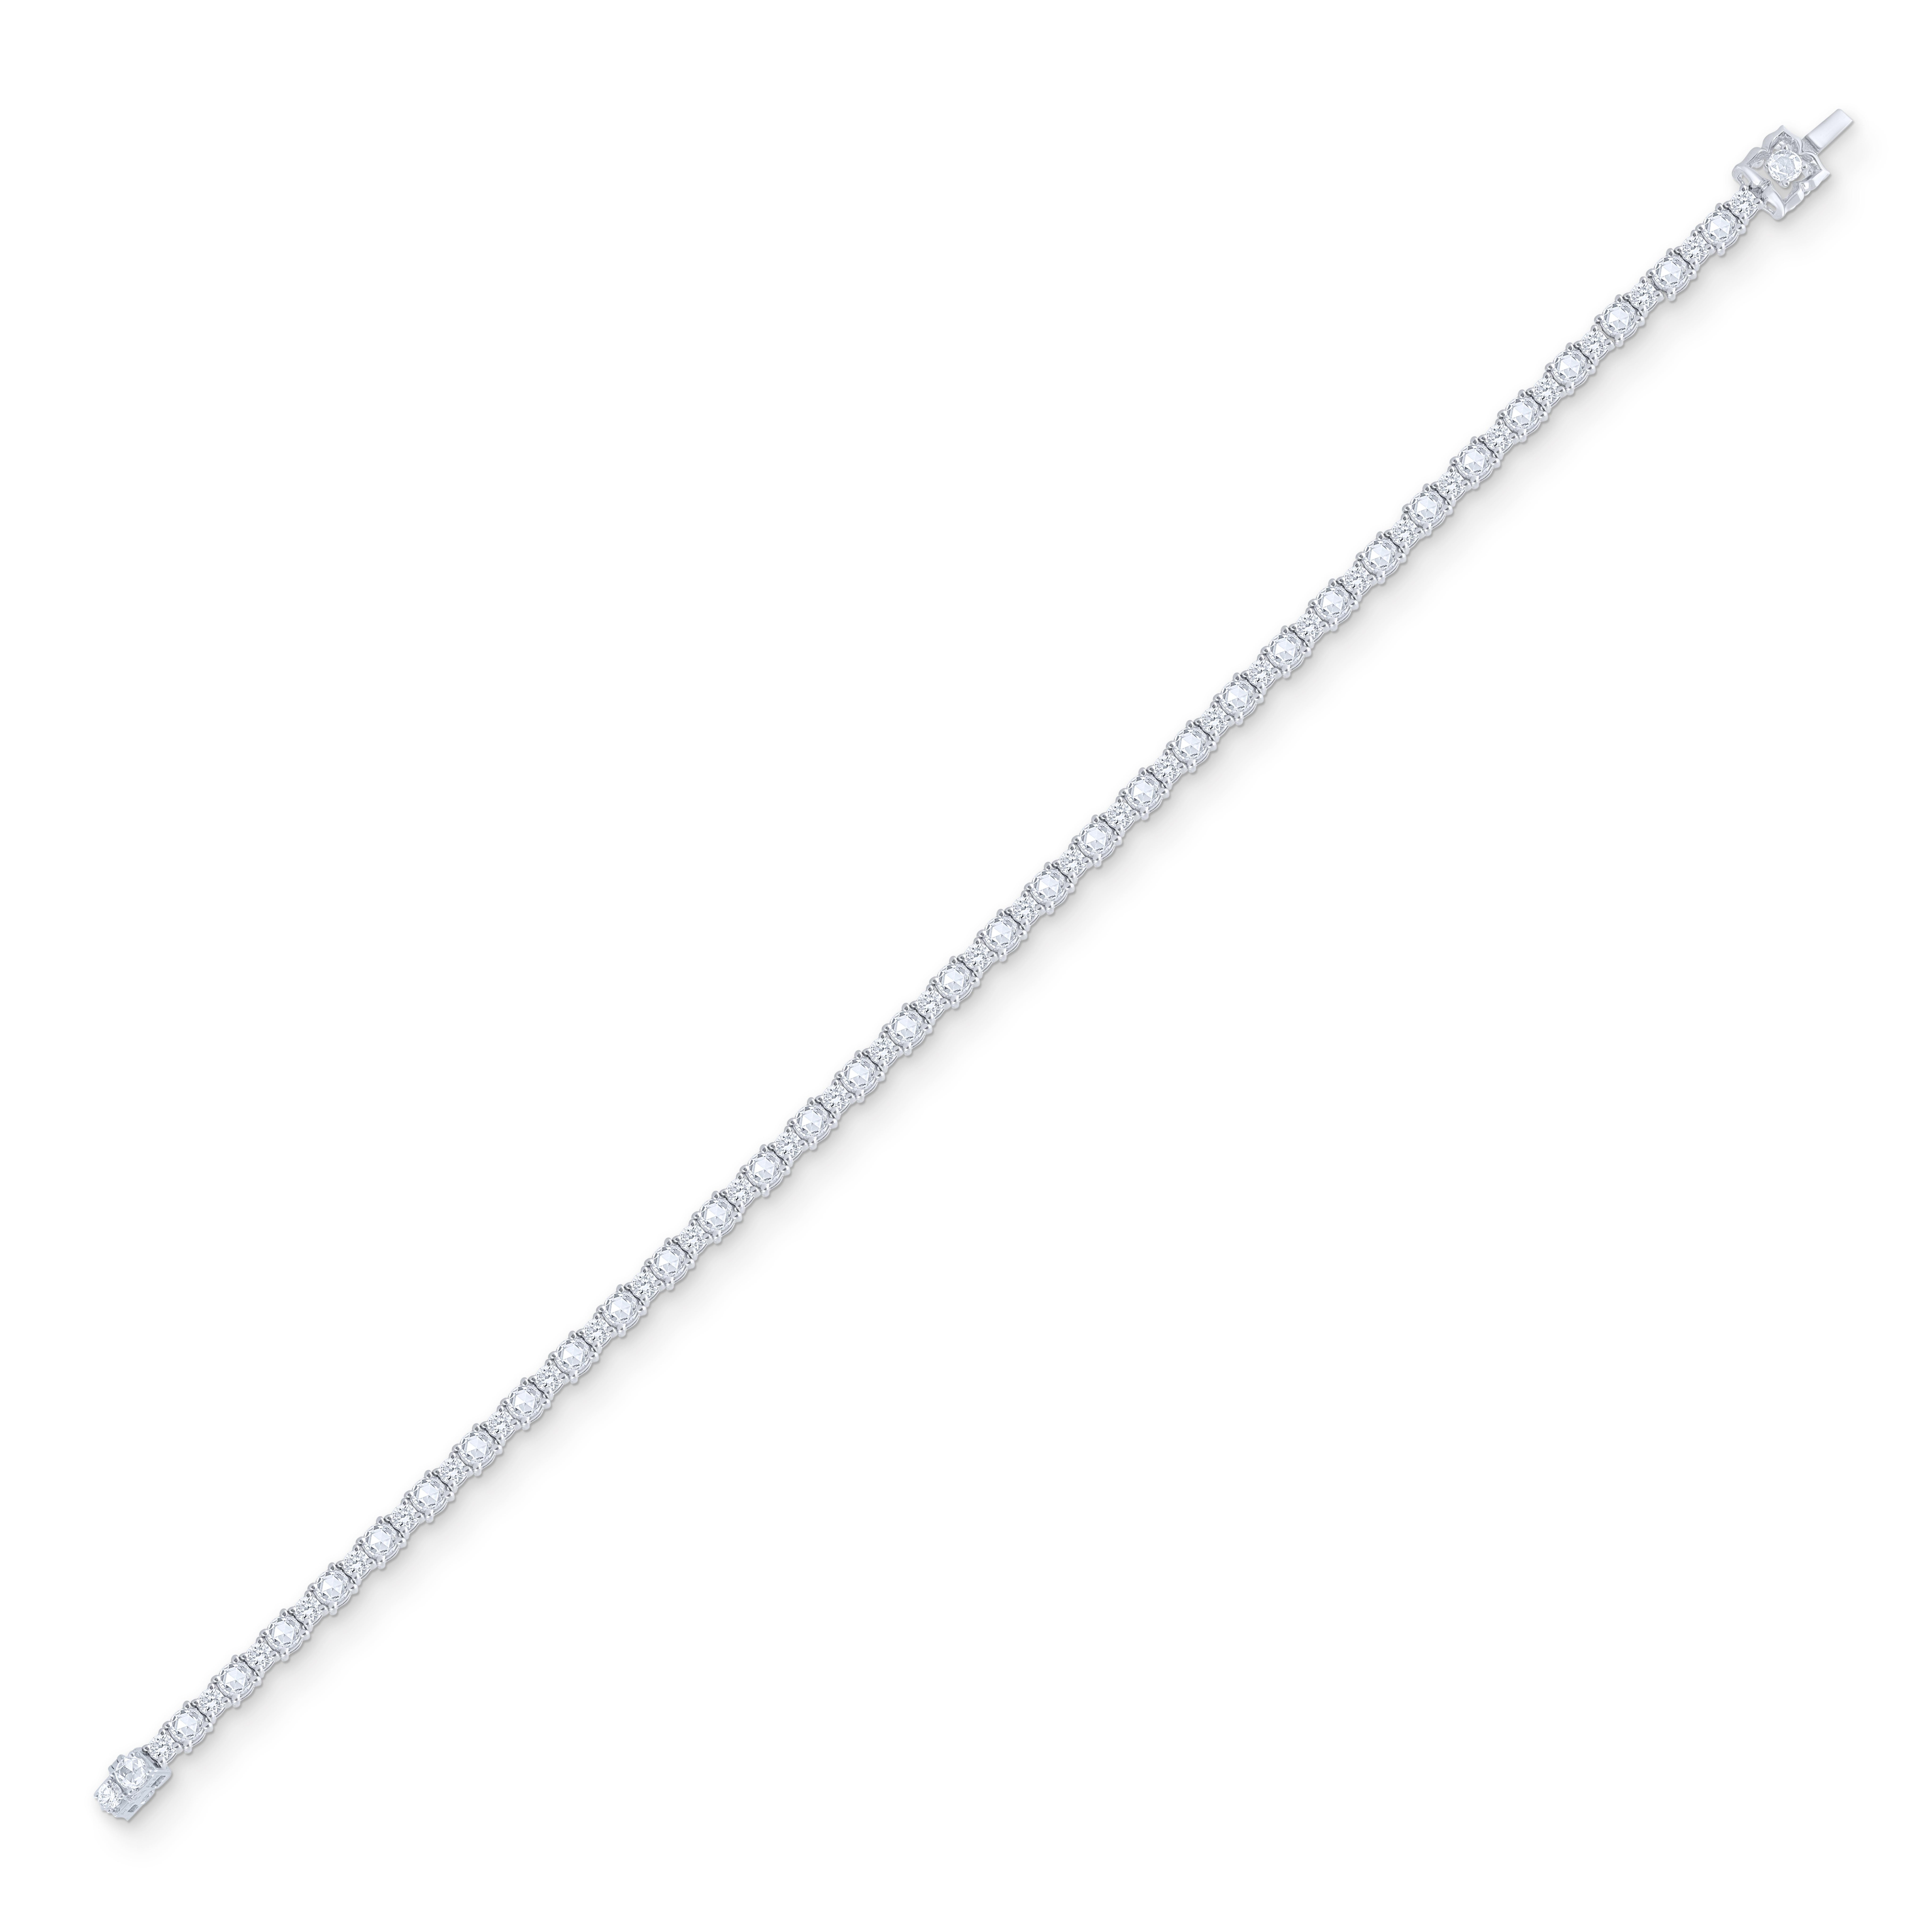 This elegant designed bracelet is studded with 35 brilliant cut and 35 rose cut round diamonds in prong setting, beautifully crafted in 18 KT white gold. Our diamonds are graded as D-F color and IF-VS clarity.

This classic tennis bracelet will be